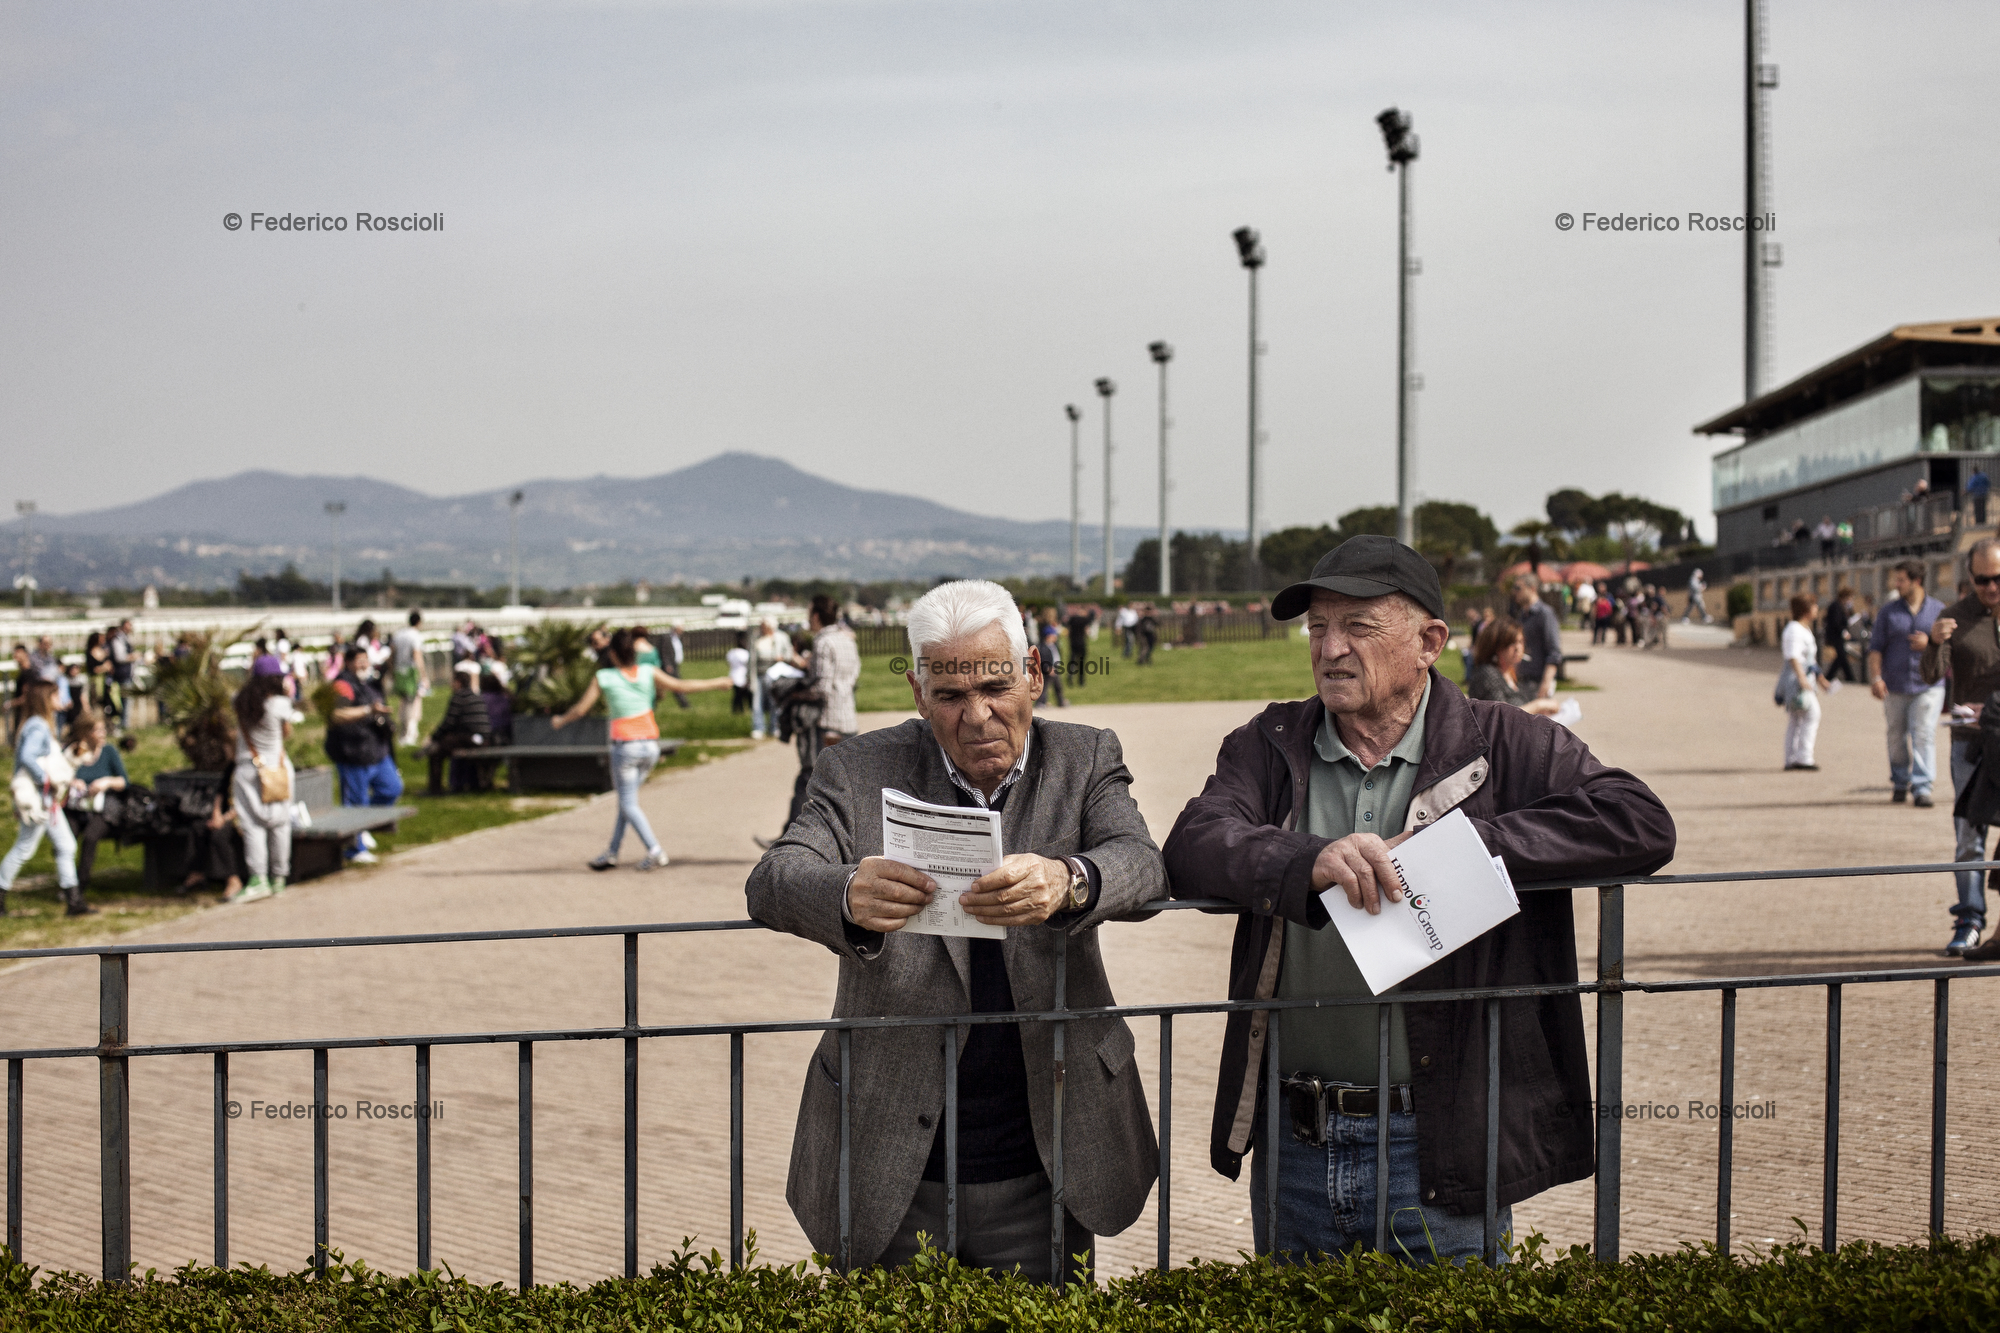 Rome, Italy. April 25, 2013. Horse racing during the Italian Liberation Day in Capannelle. Last horse racing television advertising in Italy was shown in 1992. Since than horse racing has never had any kind of support or visibility and now it faces the consequences of that behavior.